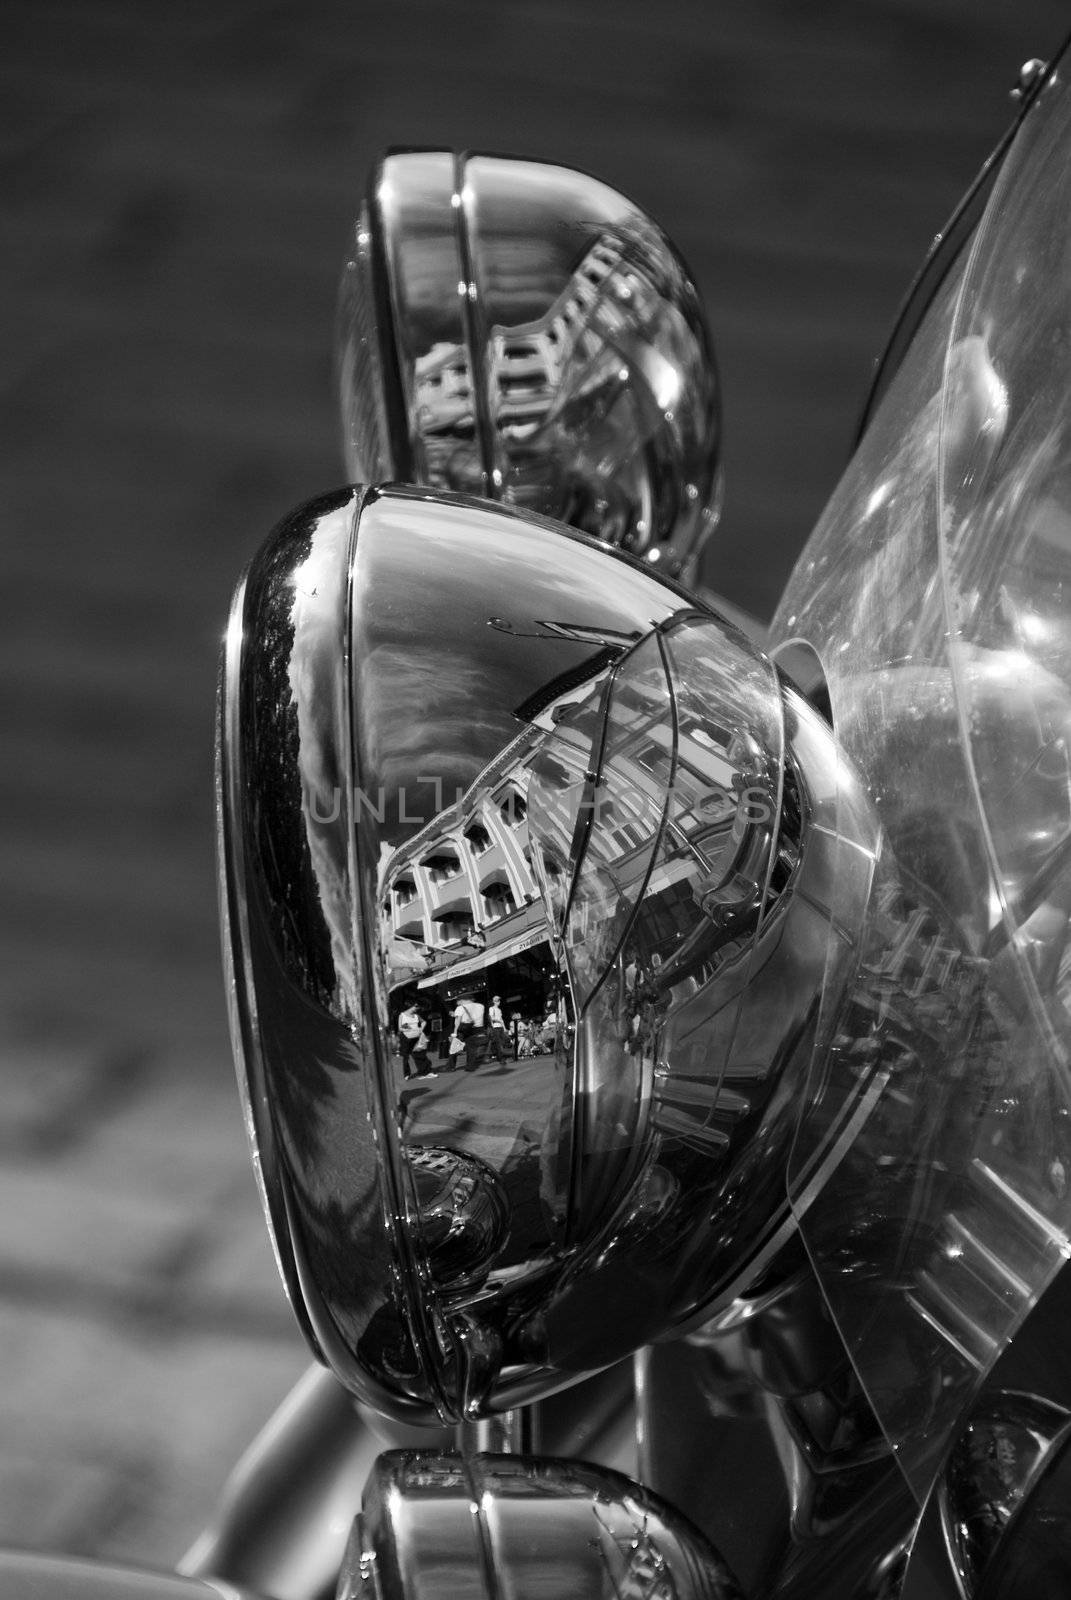 Motorbike Lamp City Reflection in a Street of Oslo, Norway